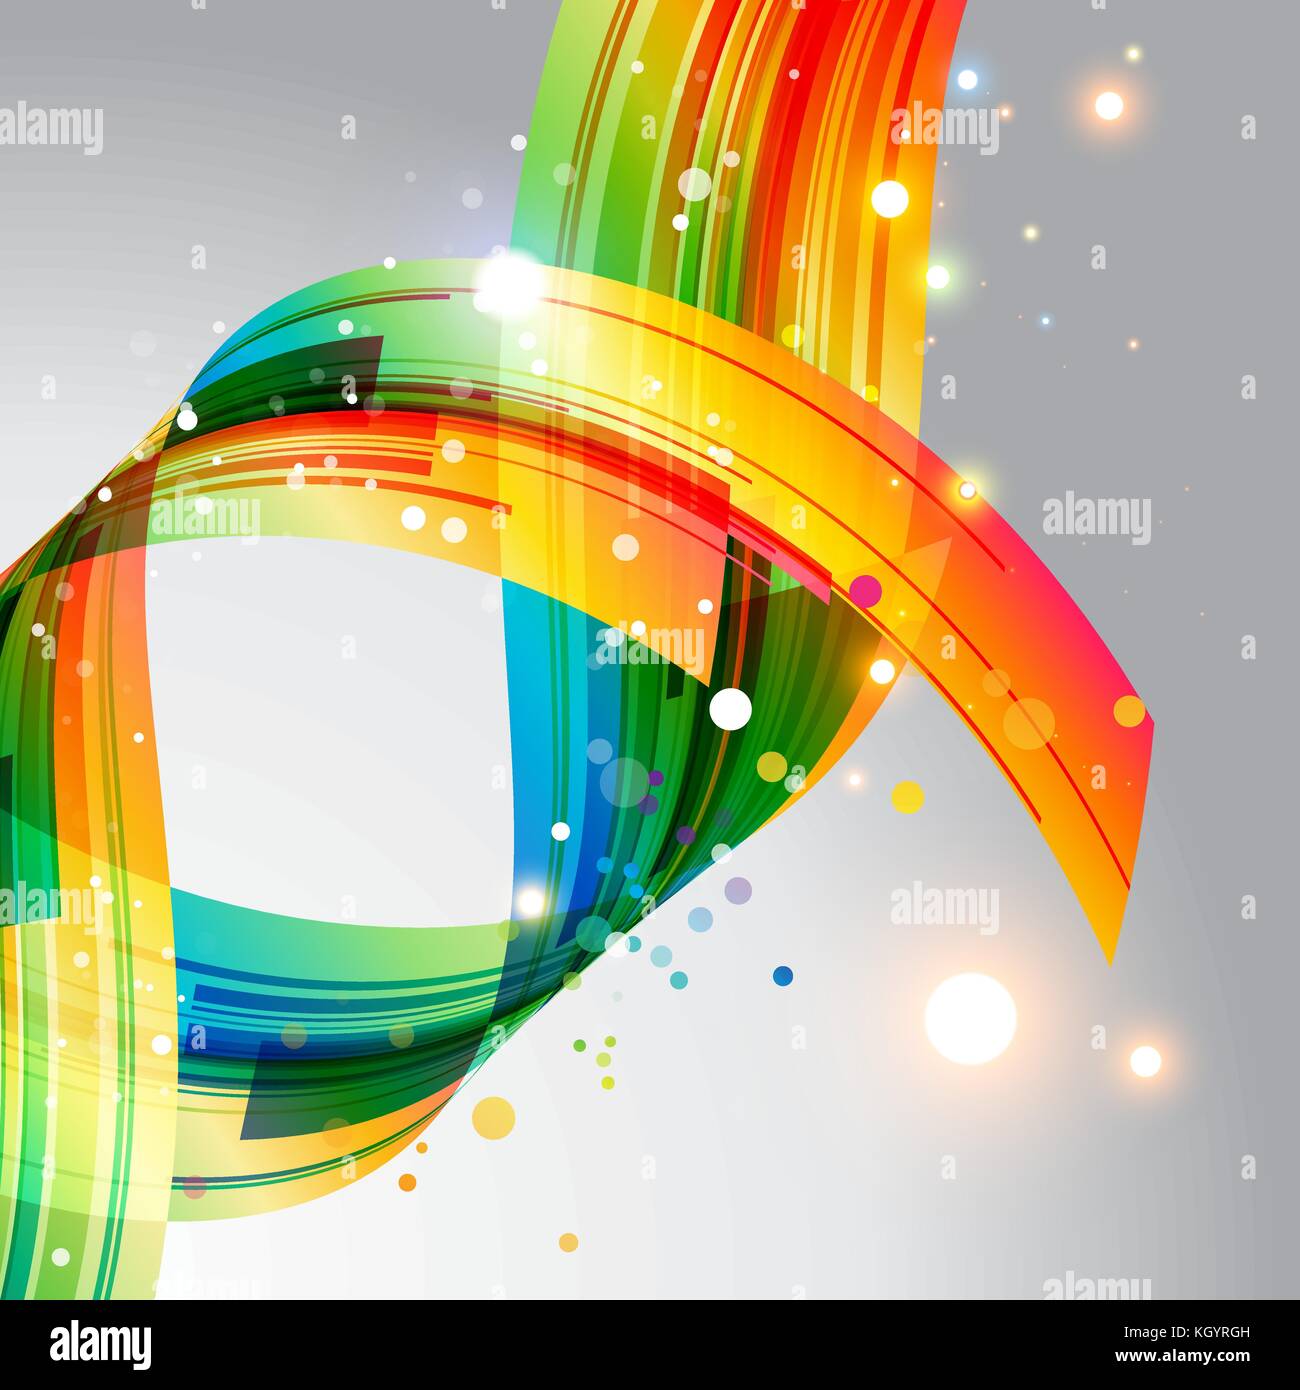 Abstraction bright element with effects Stock Vector